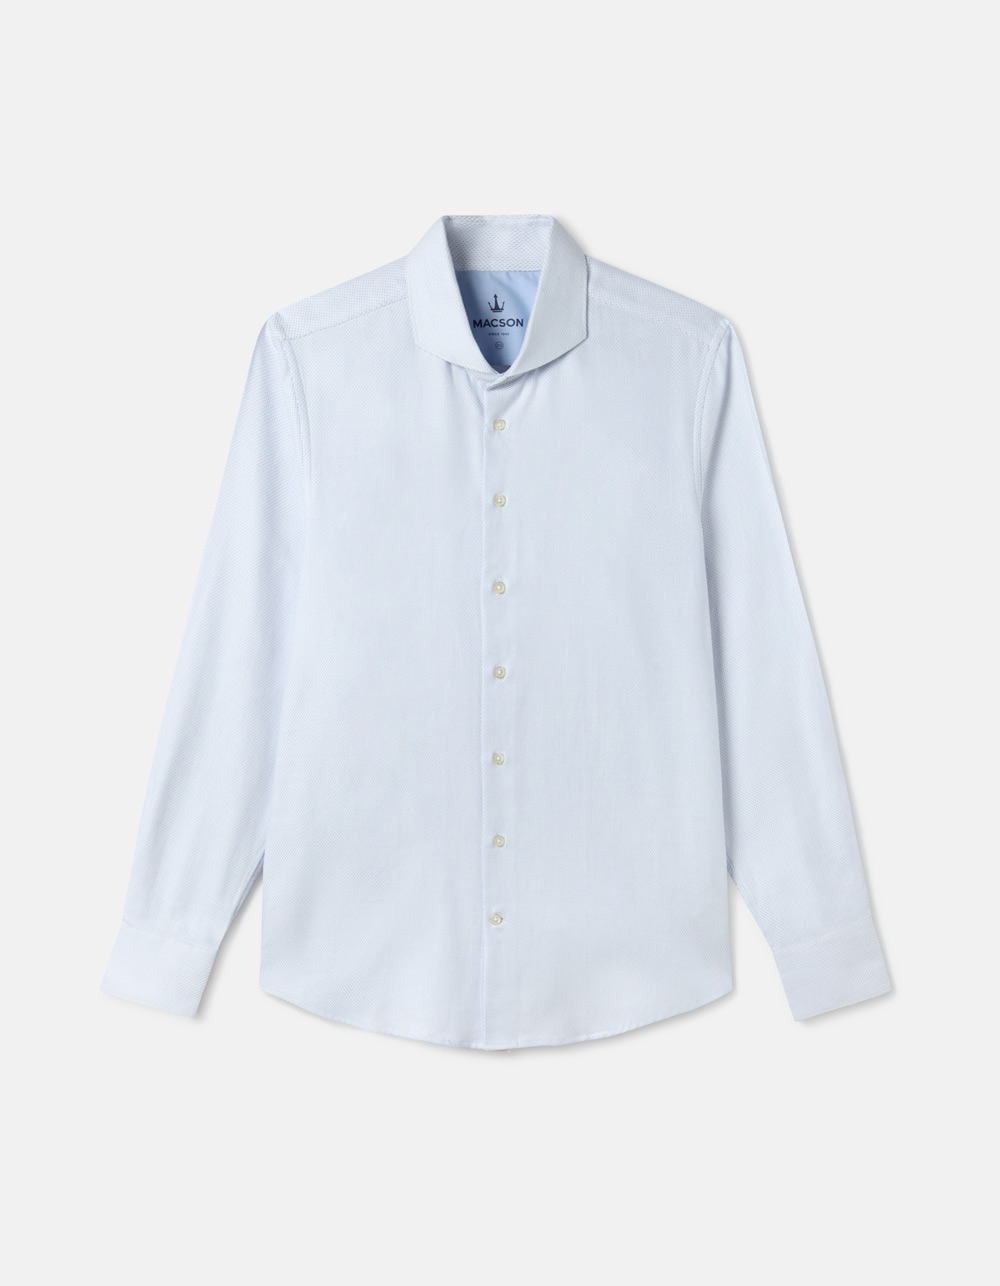 Micro-structured shirt